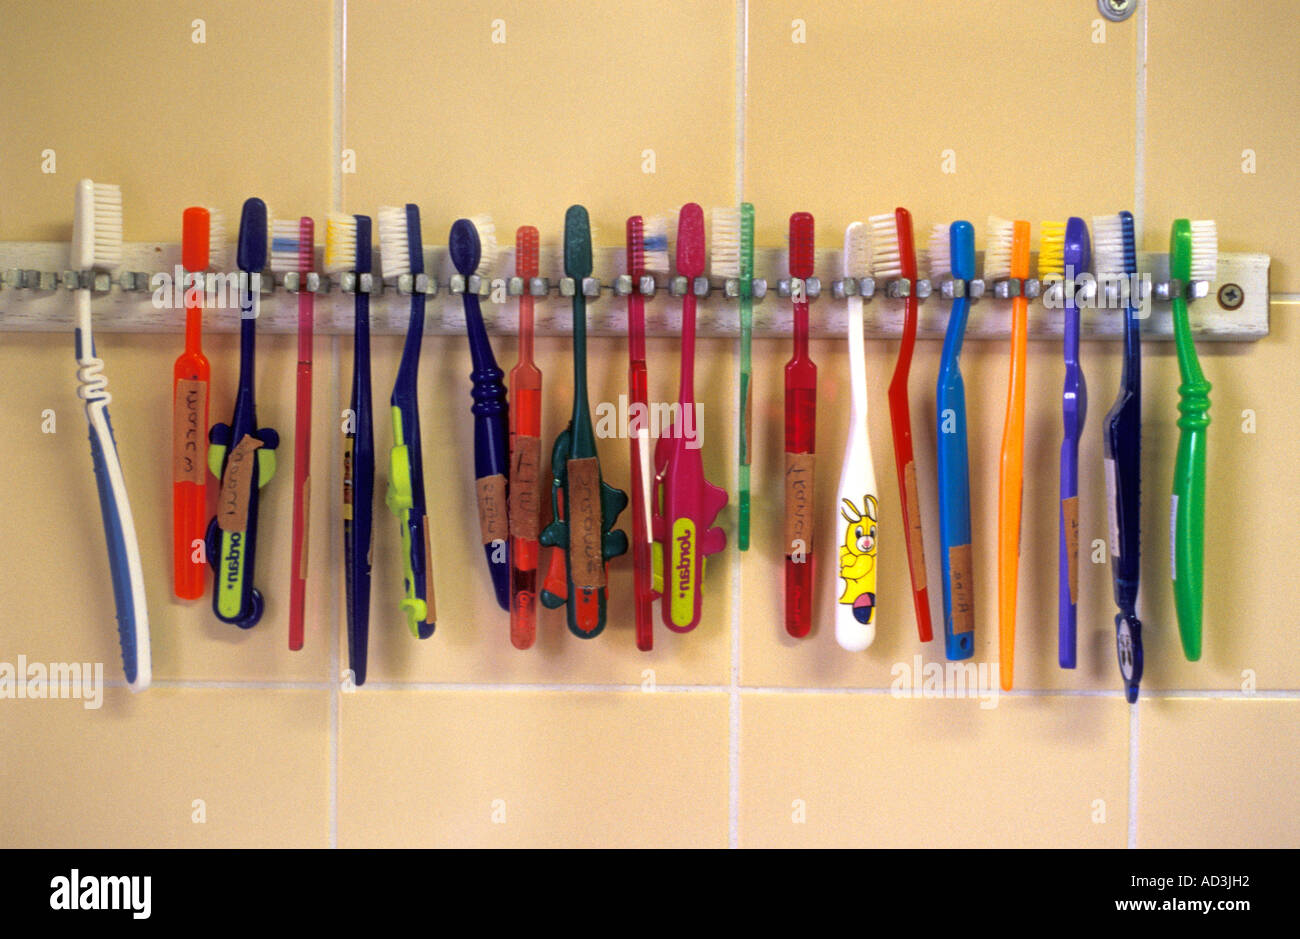 Toothbrushes in a day care center Stock Photo